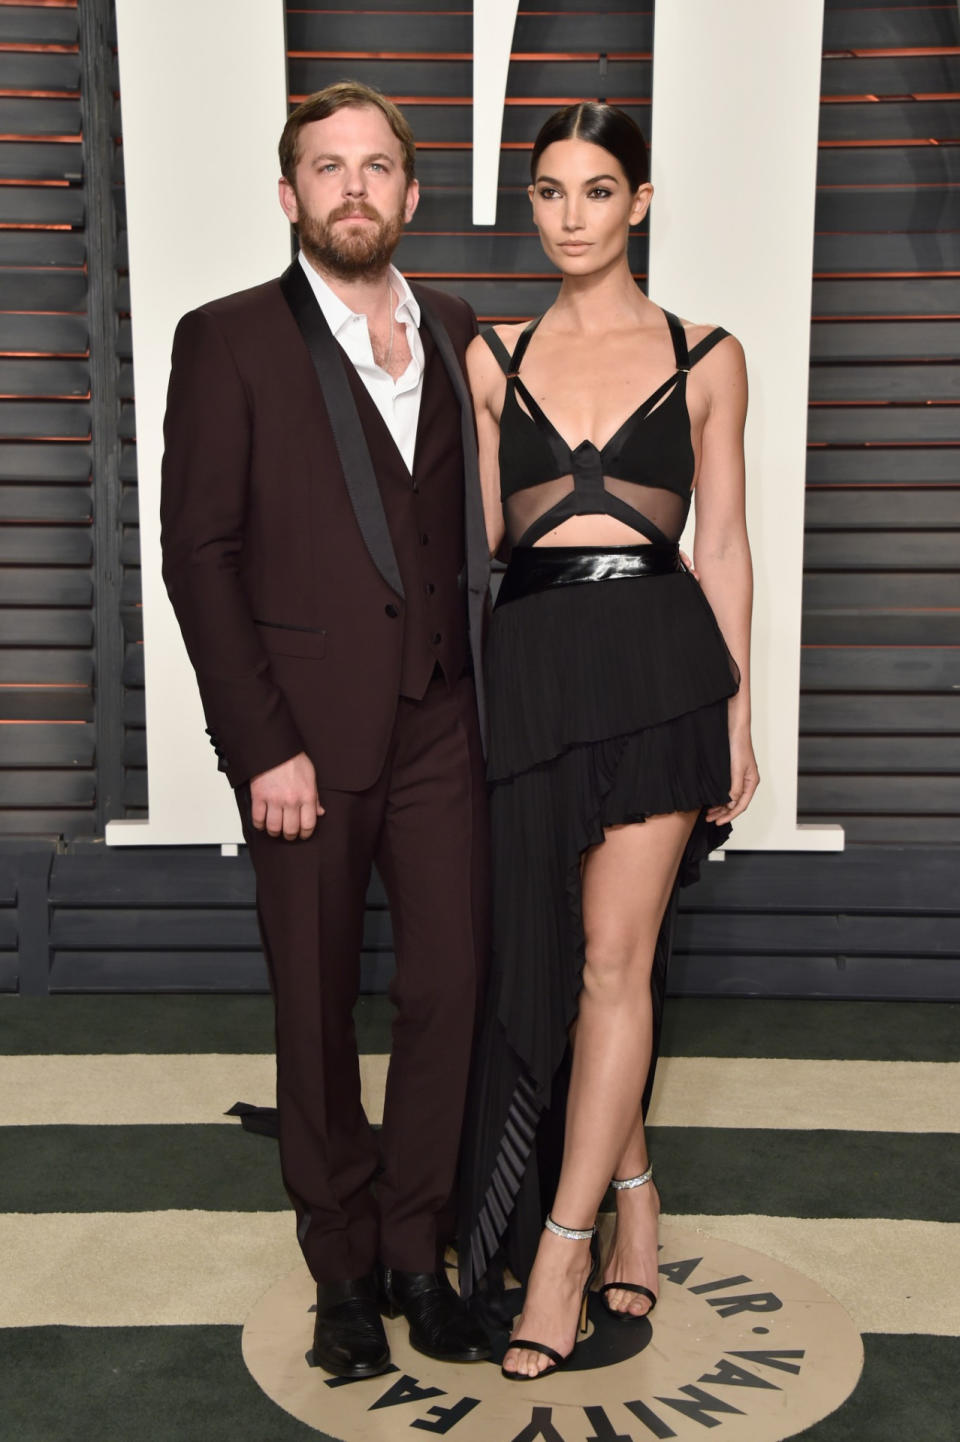 <p>The lead singer of Kings of Leon first caught the eye of Lily Aldridge in 2007. Four years later, they were married and now have a daughter who goes by the adorable name of Dixie Pearl. <i>[Photo: Getty]</i> </p>